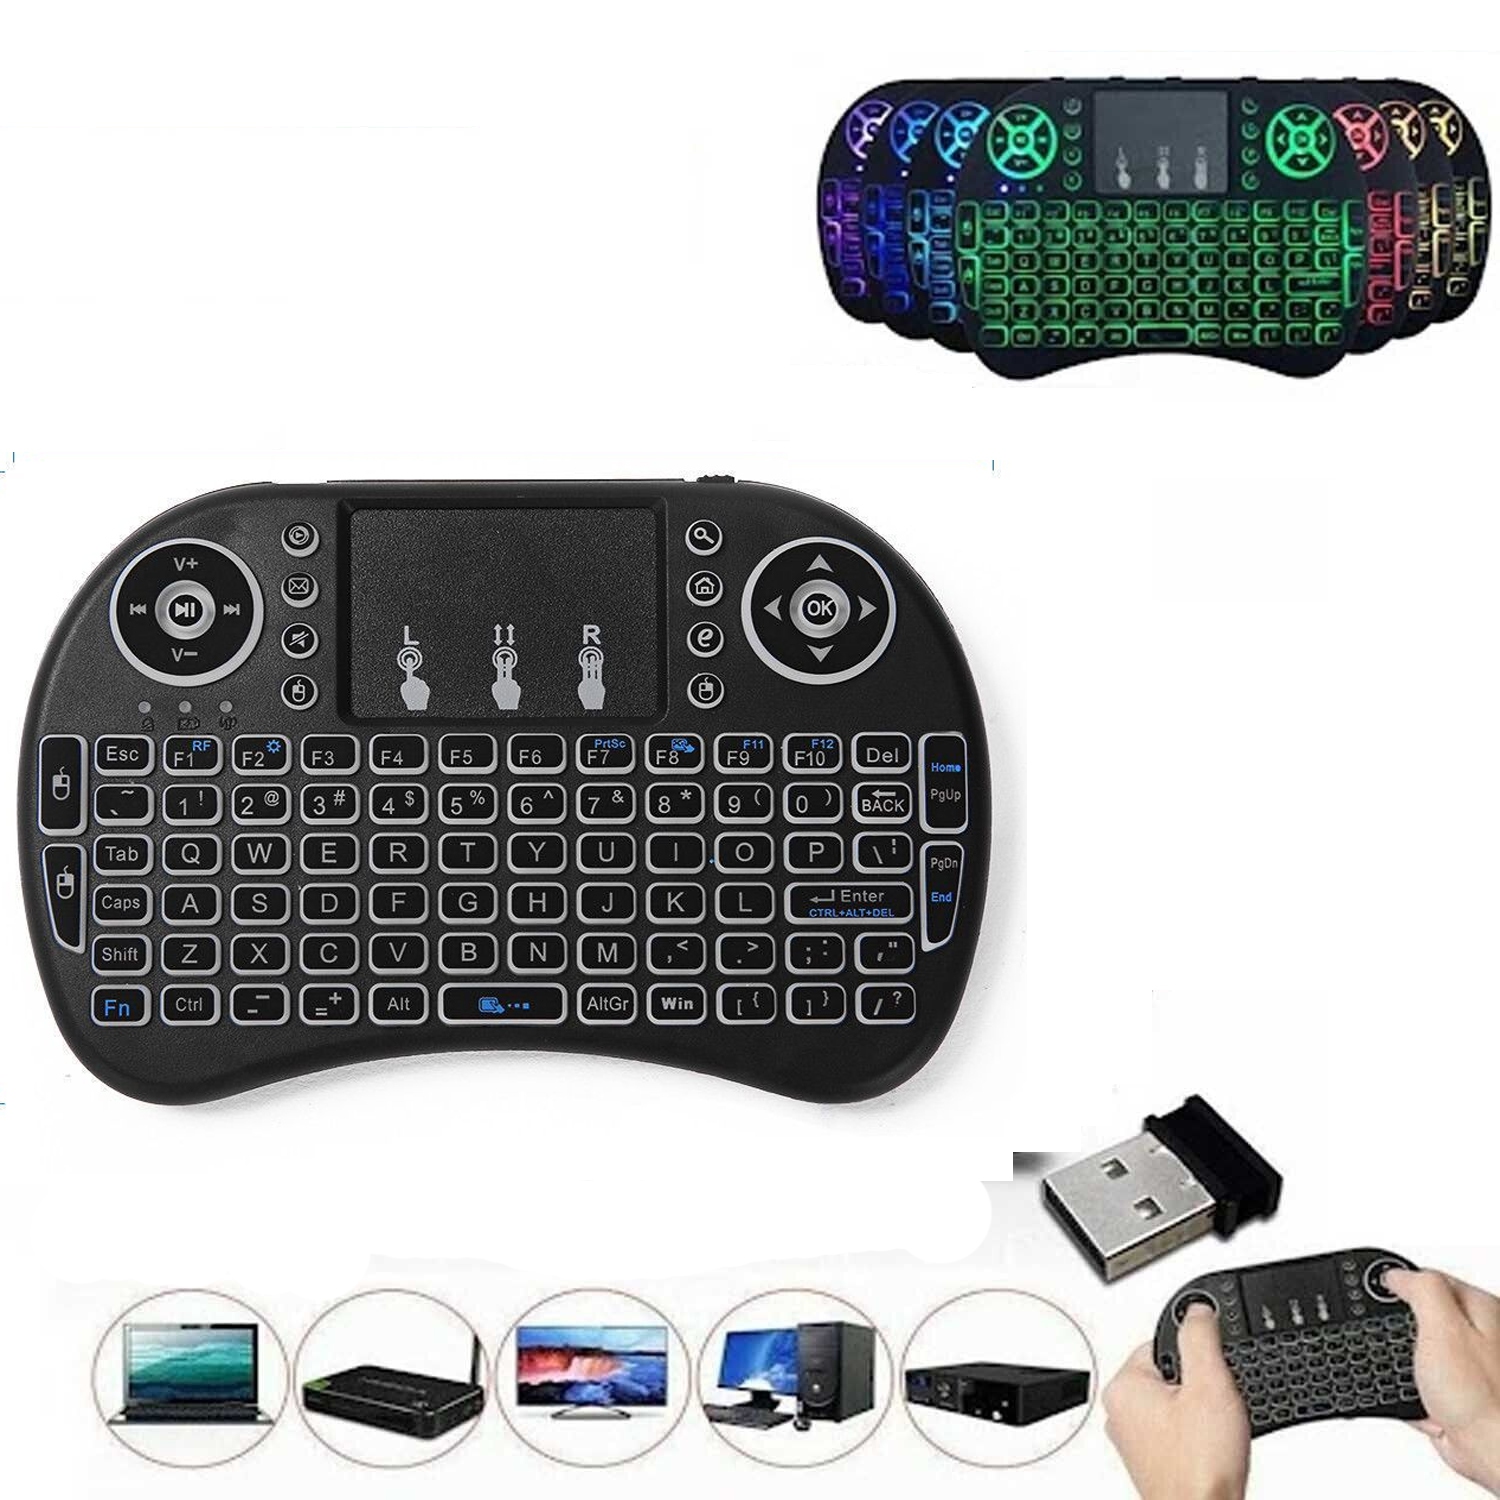 ISTAR Wireless Mini Keyboard Remote Control Touchpad For Smart TV Android TV Box PC 2.4GH